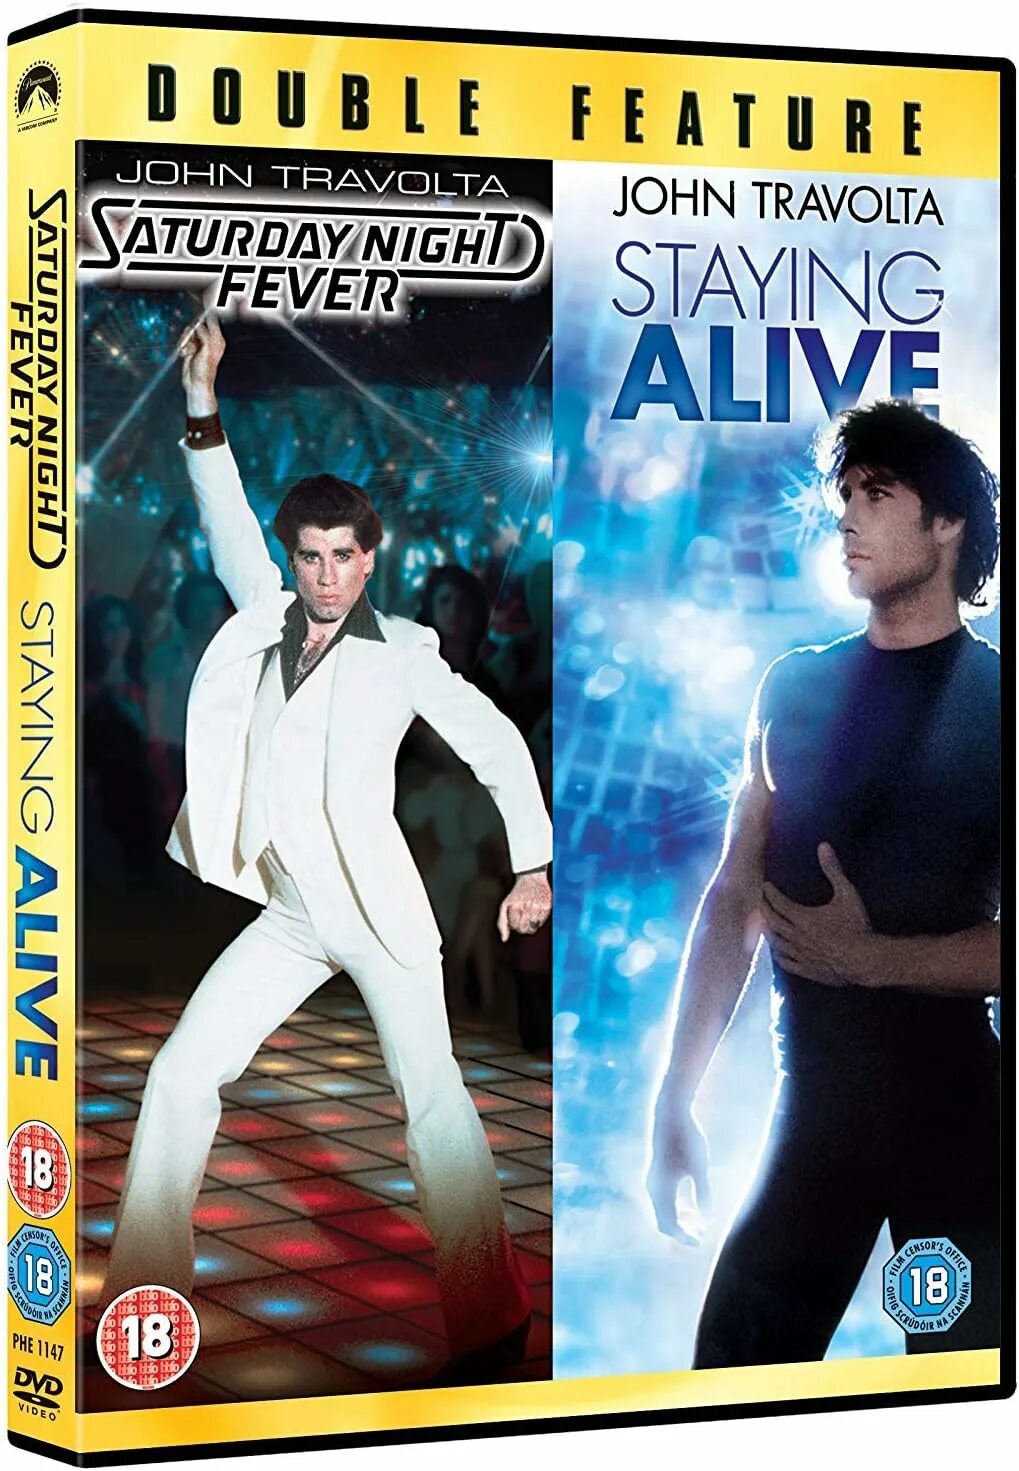 Stayin alive текст. Staying Alive. Stayin Alive. Джон Траволта DVD. Stayin’ Alive Траволта.